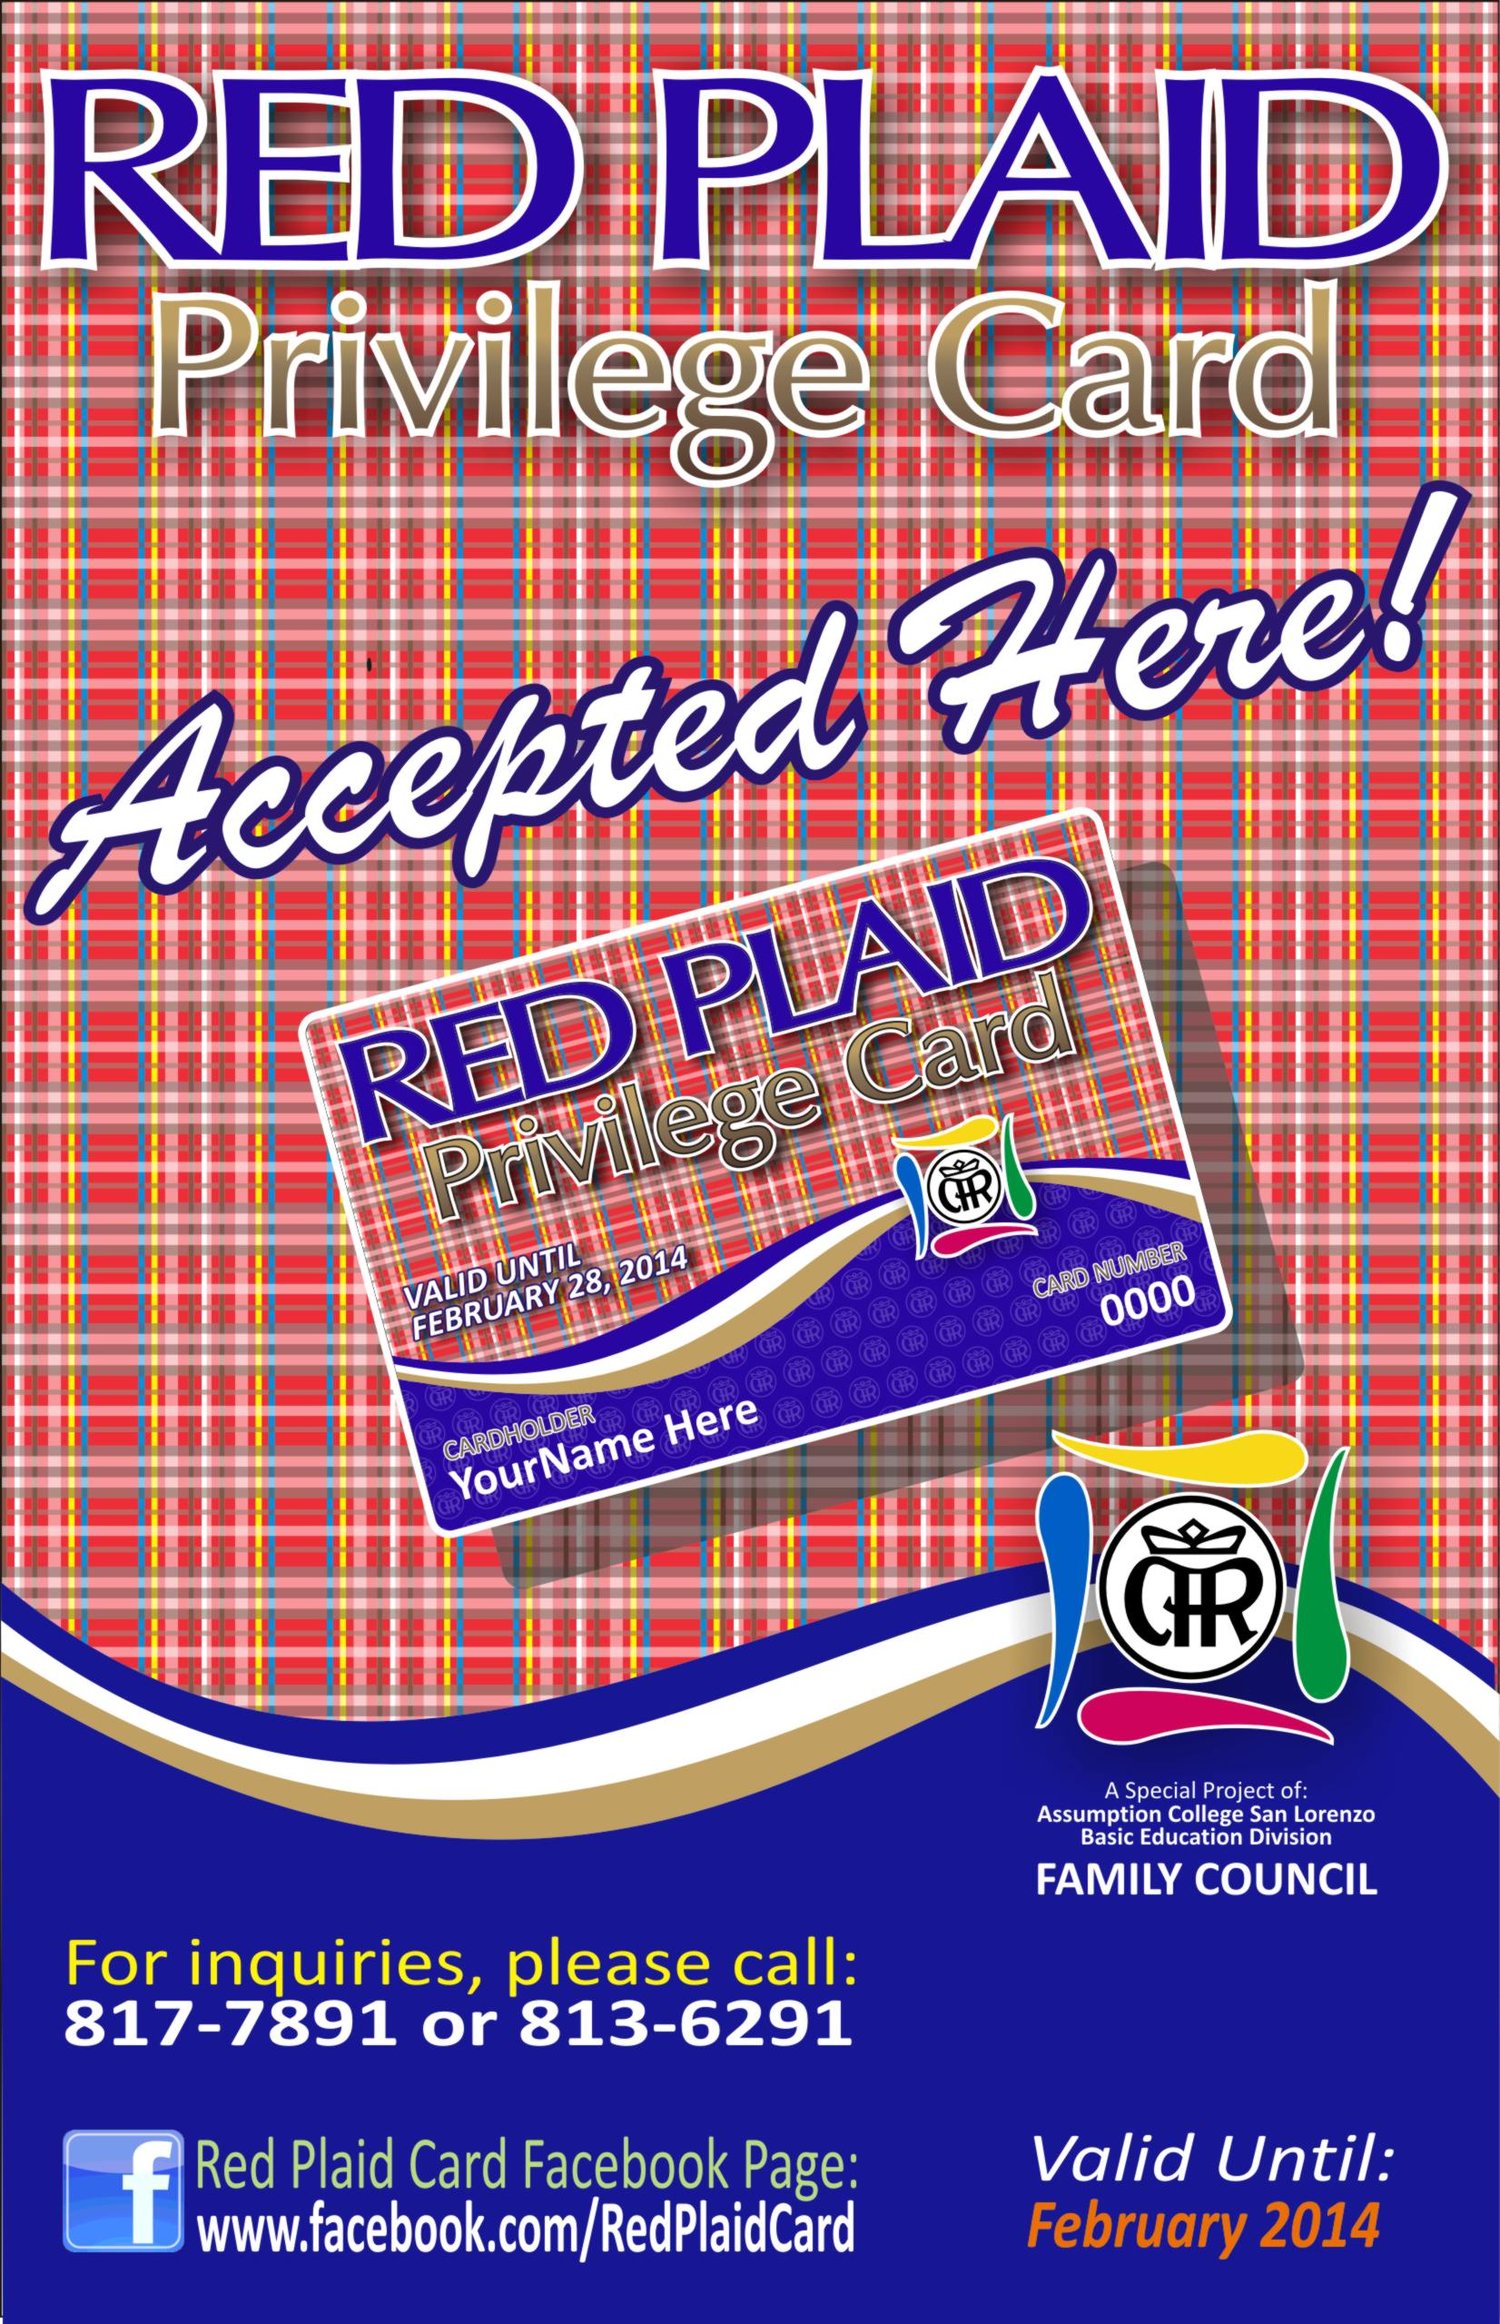 Store-signage-red-plaid-card-accepted-here-version-1.jpg